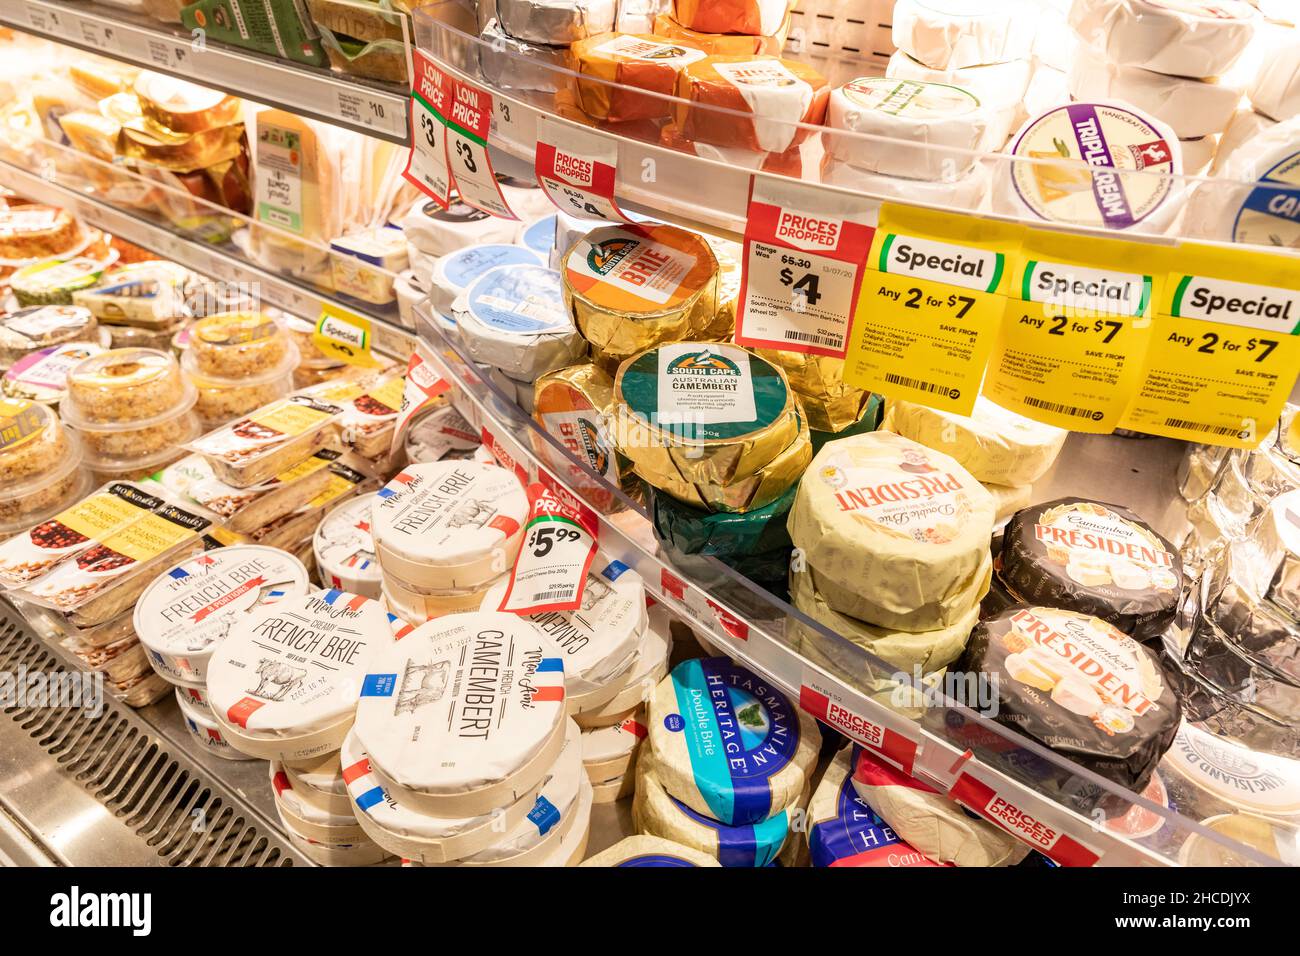 Australian and French cheeses including double brie and camembert on sale in a Sydney supermarket chilled section, NSW,Australia Stock Photo